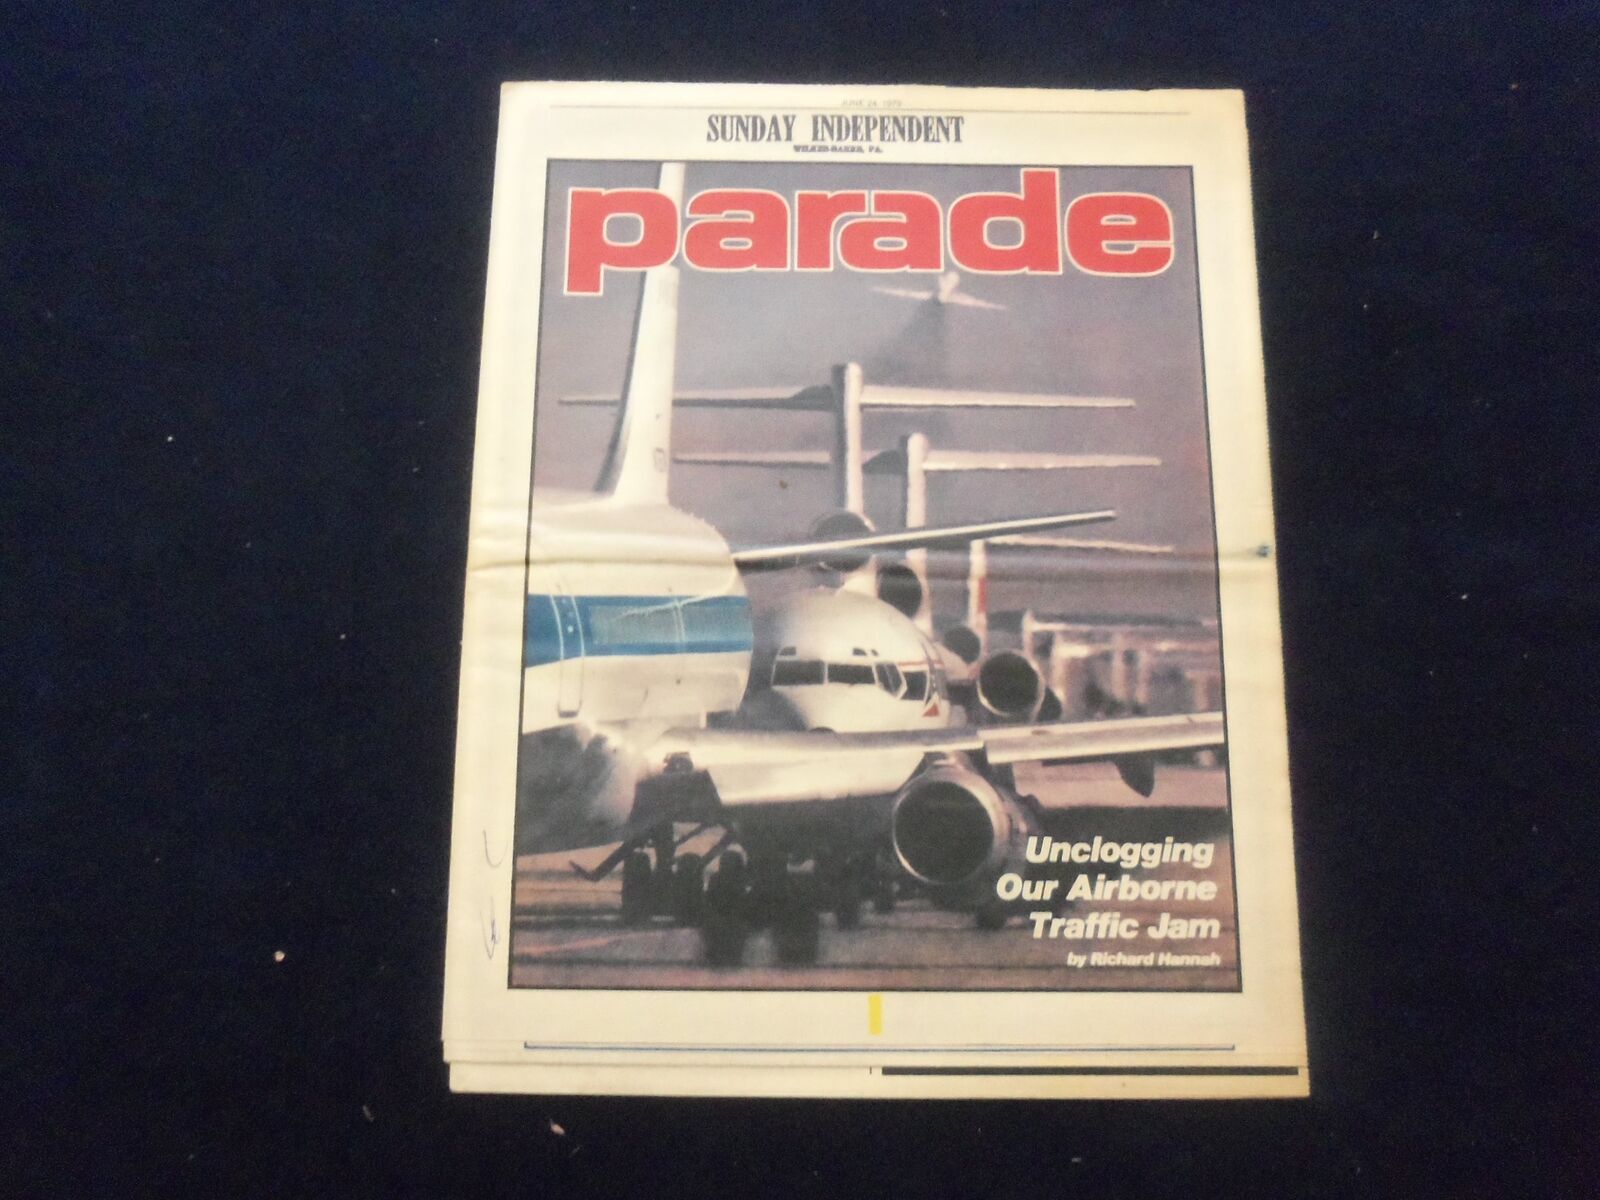 1979 JUNE 24 SUNDAY INDEPENDENT PARADE MAGAZINE-WILKES-BARRE-AIR TRAFFIC-NP 6211